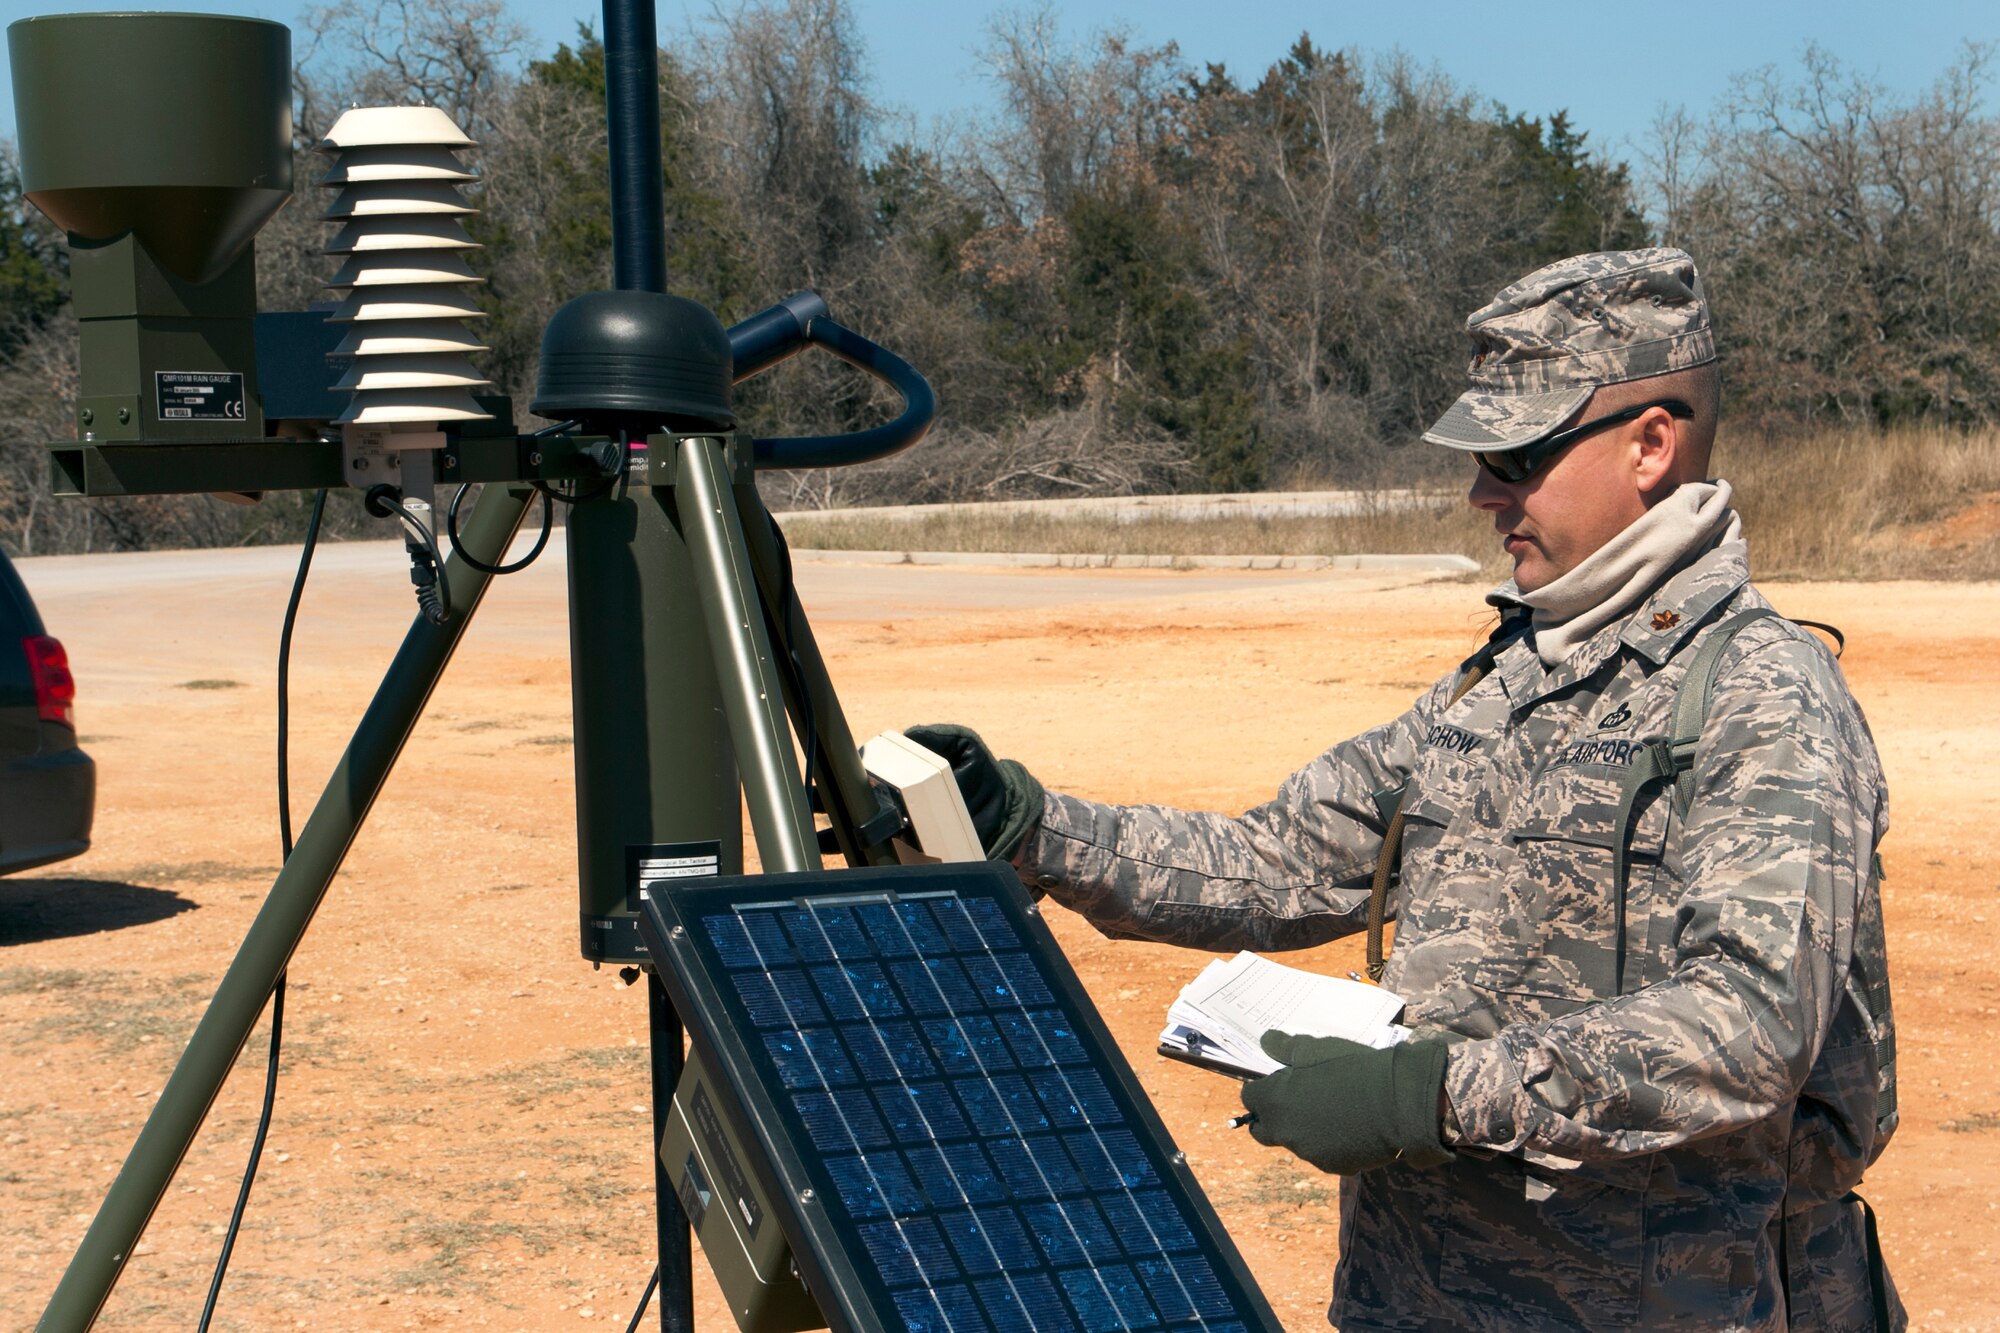 Maj. Paul E. Buschow of Hutto, Texas, commander of the Texas Air National Guard's 209th Weather Flight, based at Camp Mabry, in Austin, Texas, participates in weather training at Camp Swift, near Bastrop, March 2, 2013. The training is part of an annual requirement. (National Guard photo by Air Force Staff Sgt. Phil Fountain / Released)